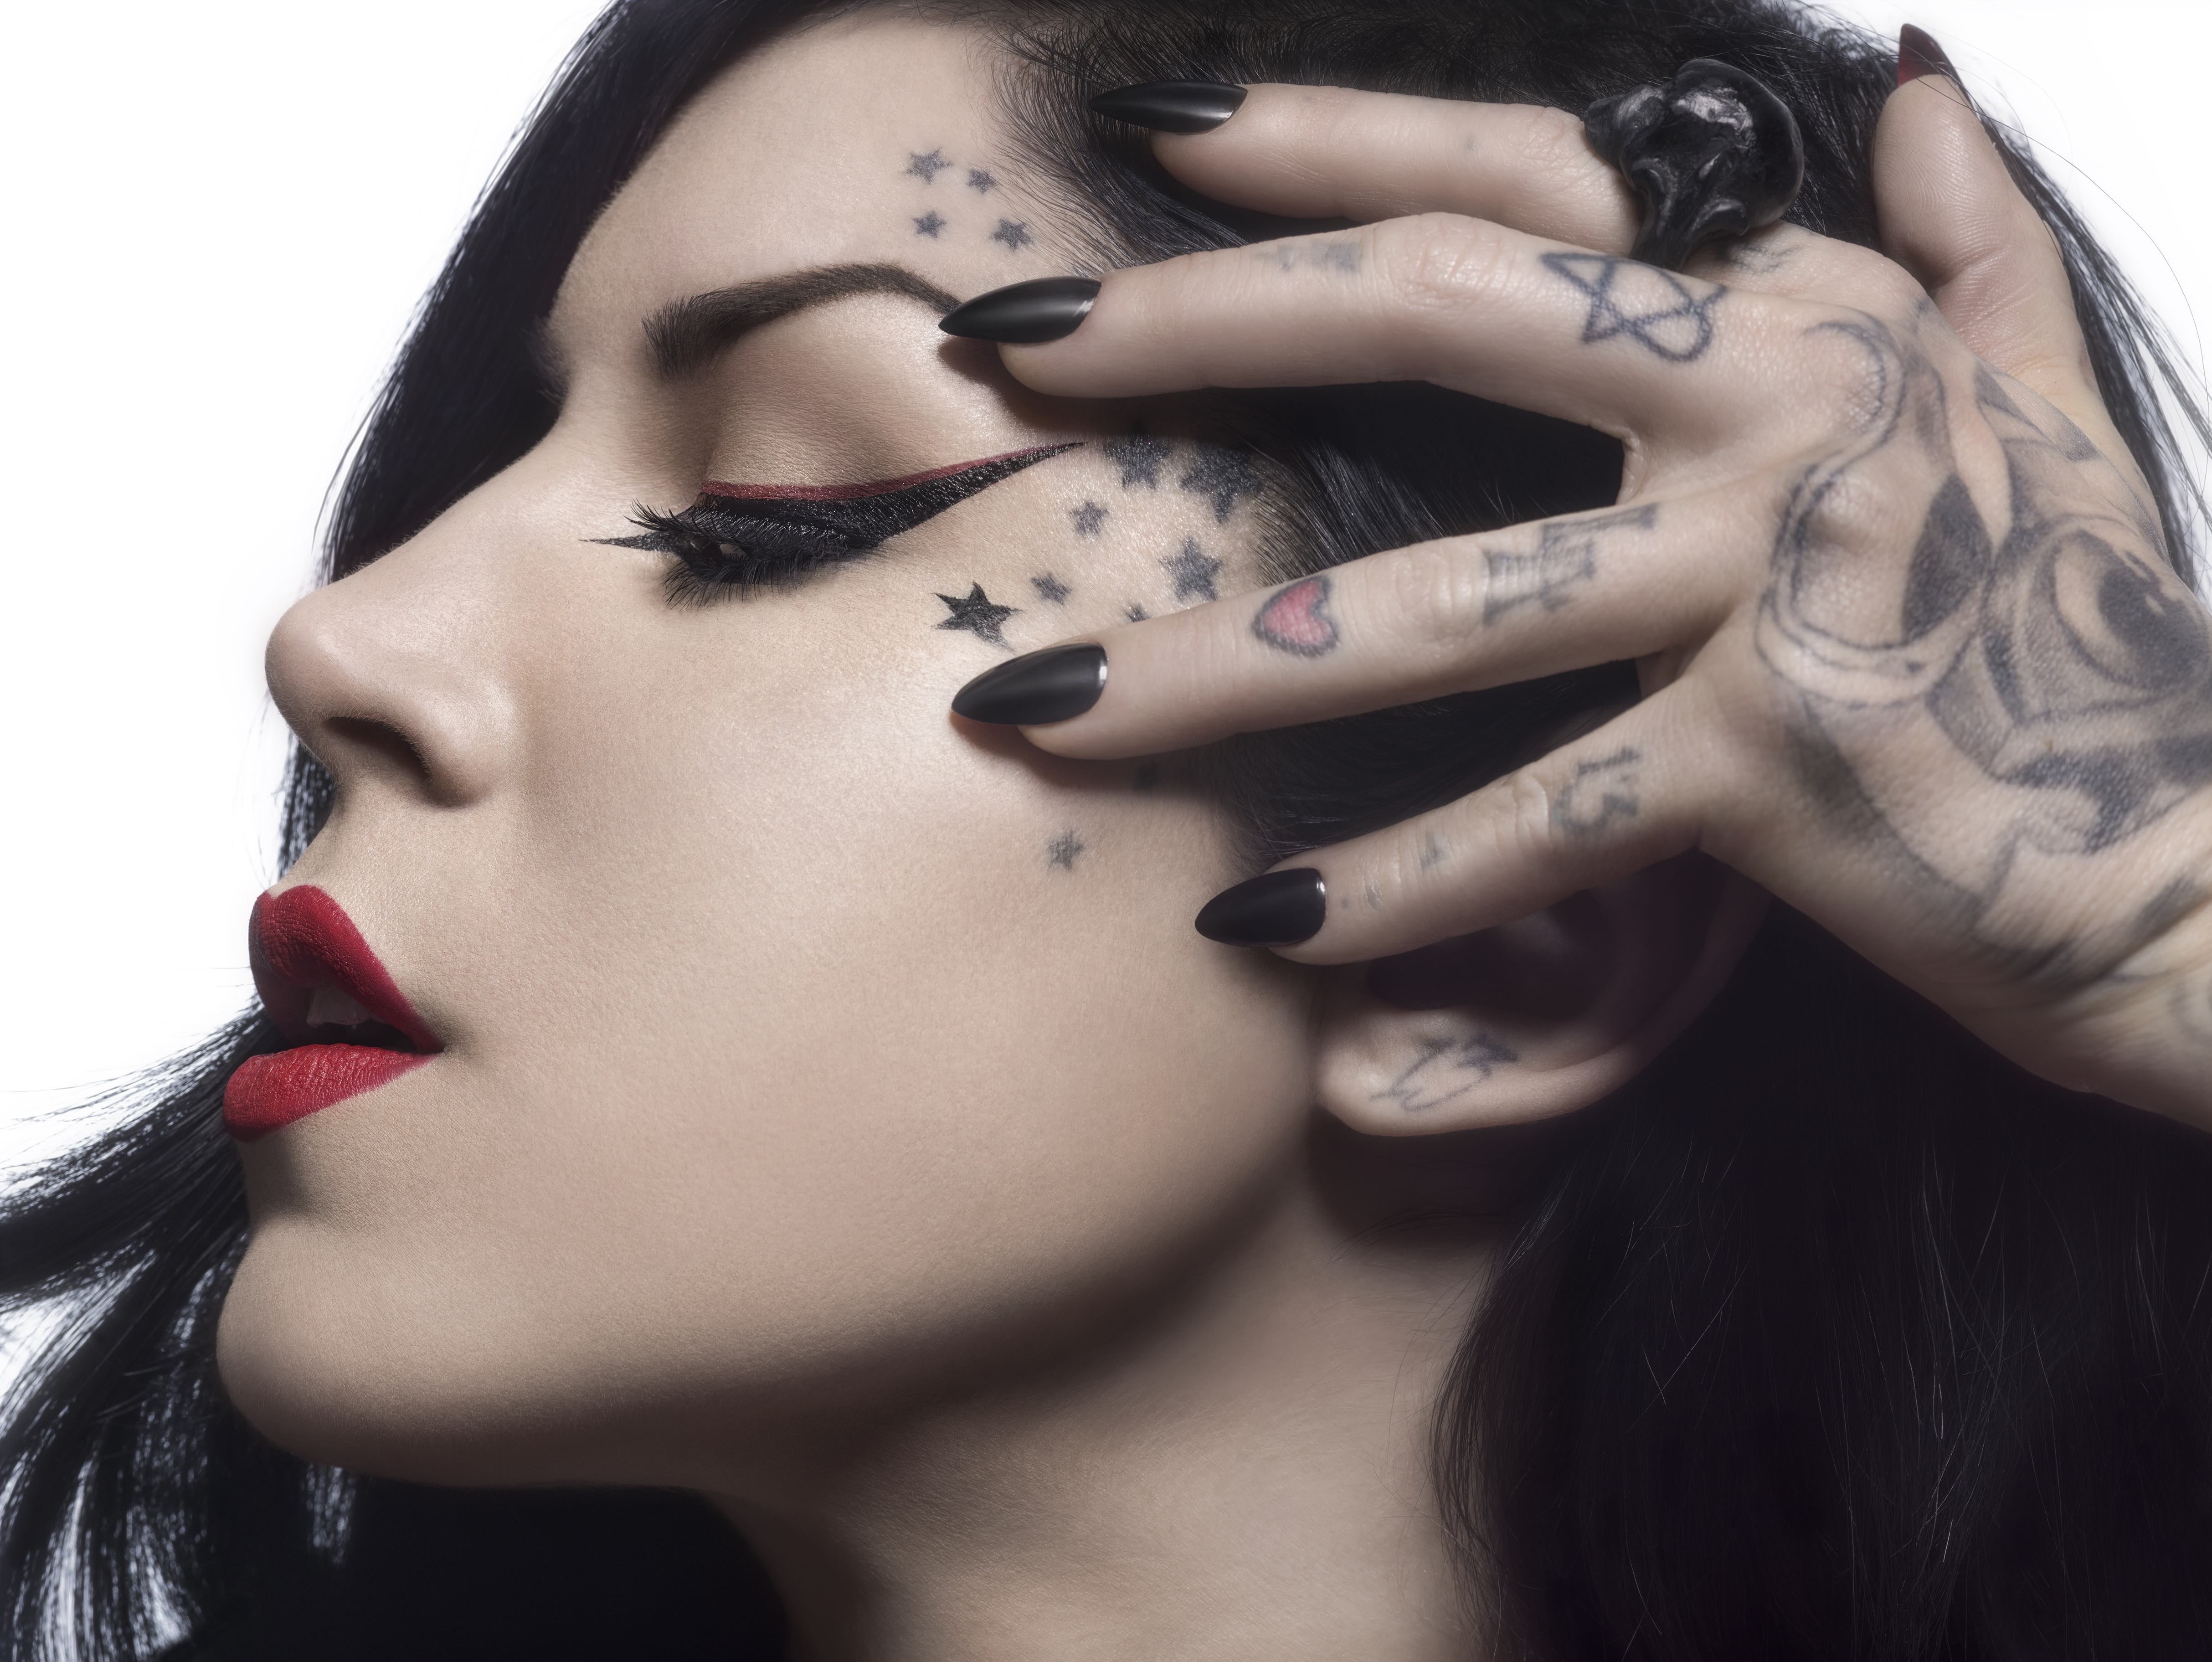 People 4854x3647 Kat Von D women tattoo Tattoo Artist black nails hands portrait profile inked girls painted nails face closeup simple background